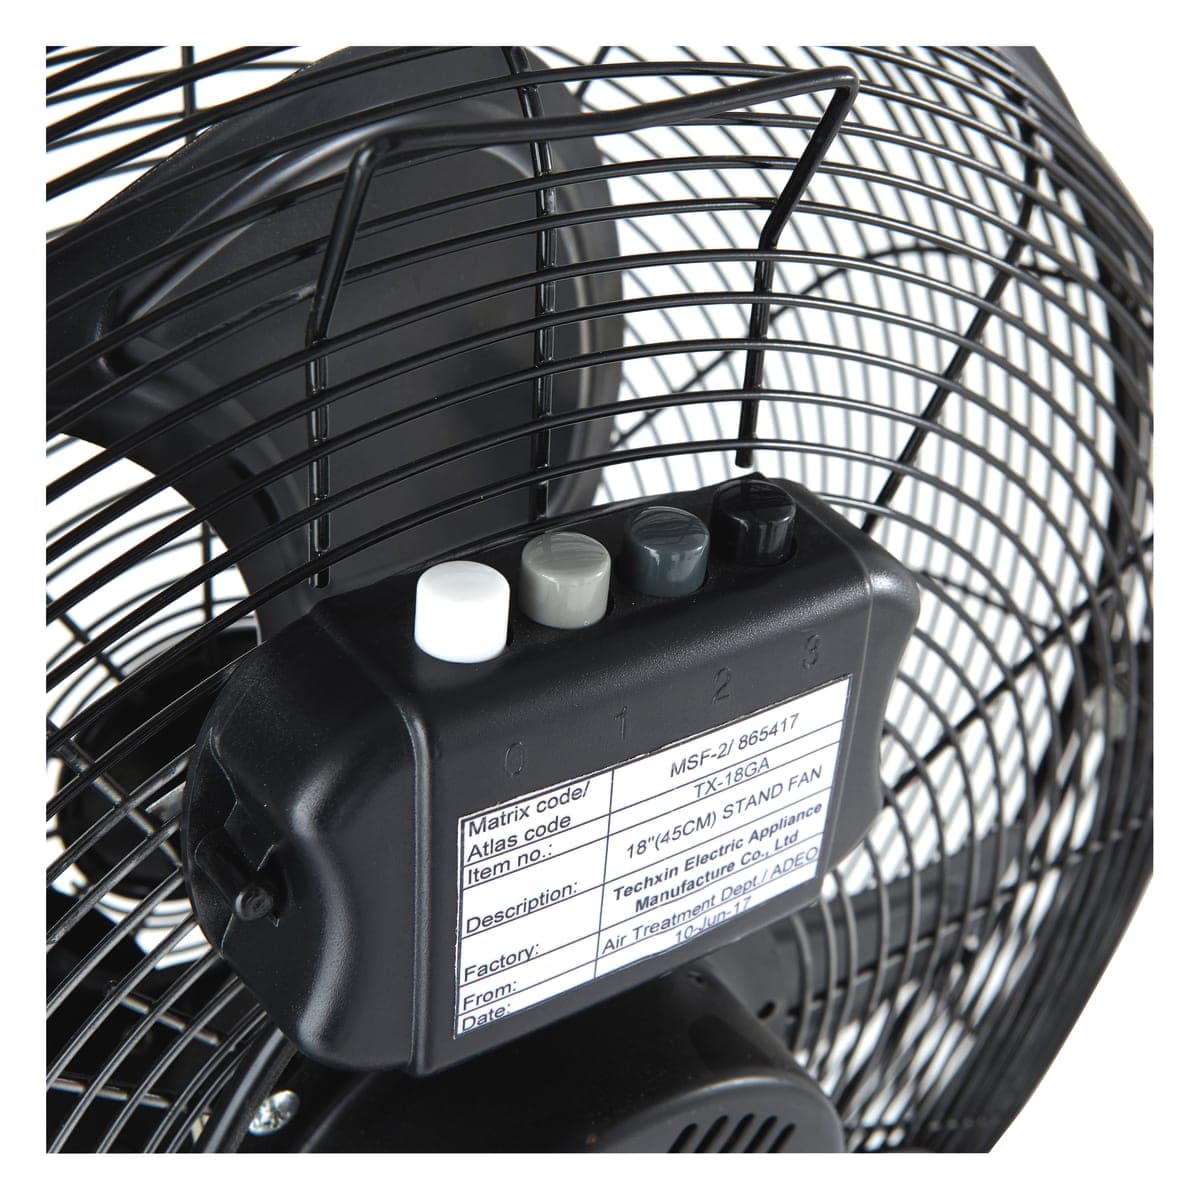 EQUATION HIGH-SPEED STANDING FAN